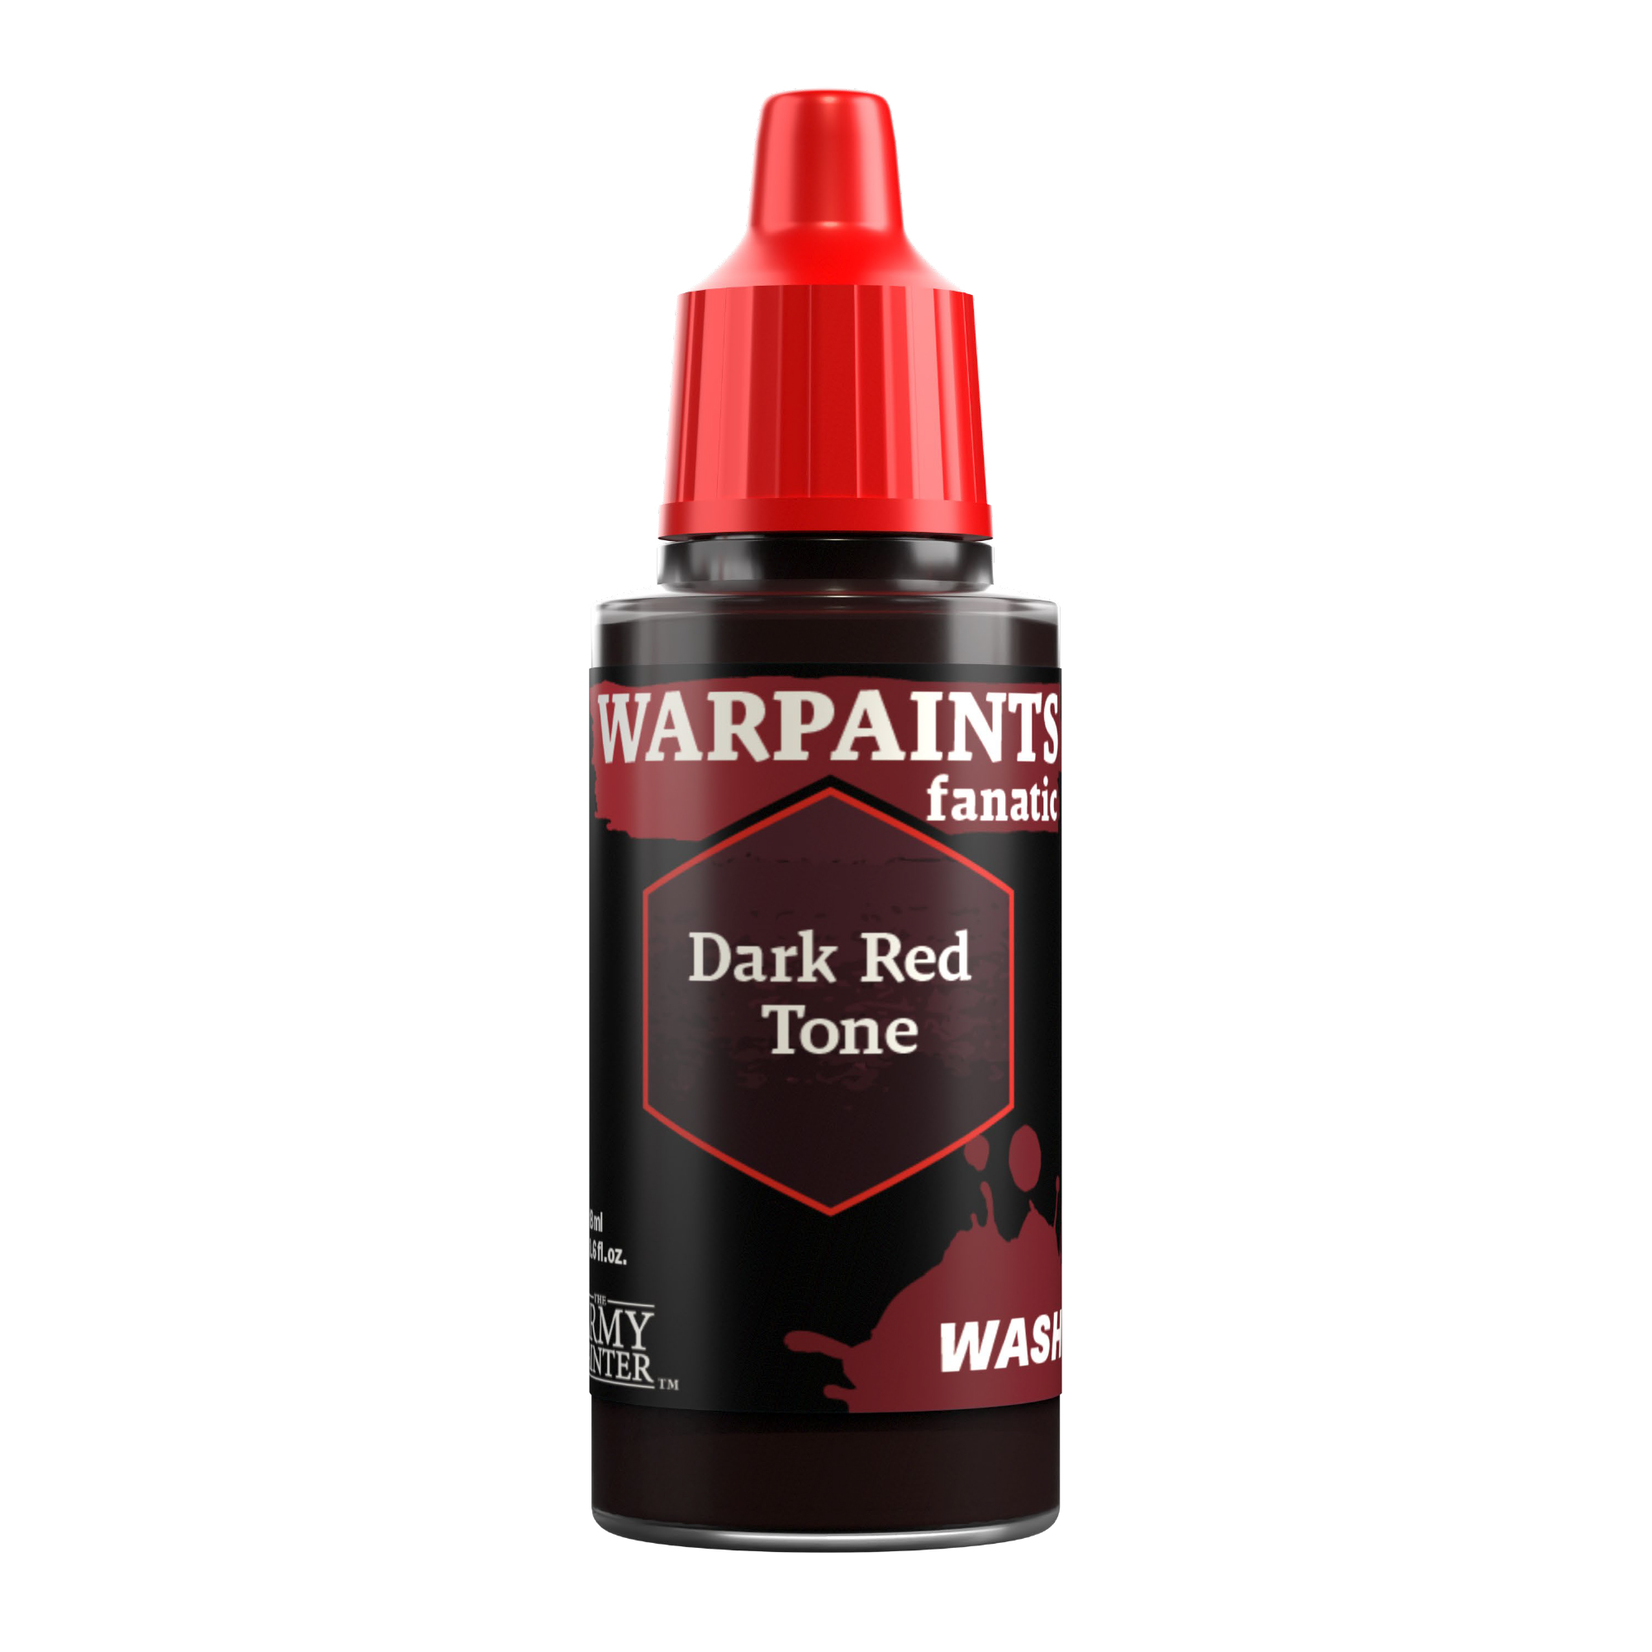 Army Painter Army Painter Warpaints Fanatic Wash Dark Red Tone 18 ml